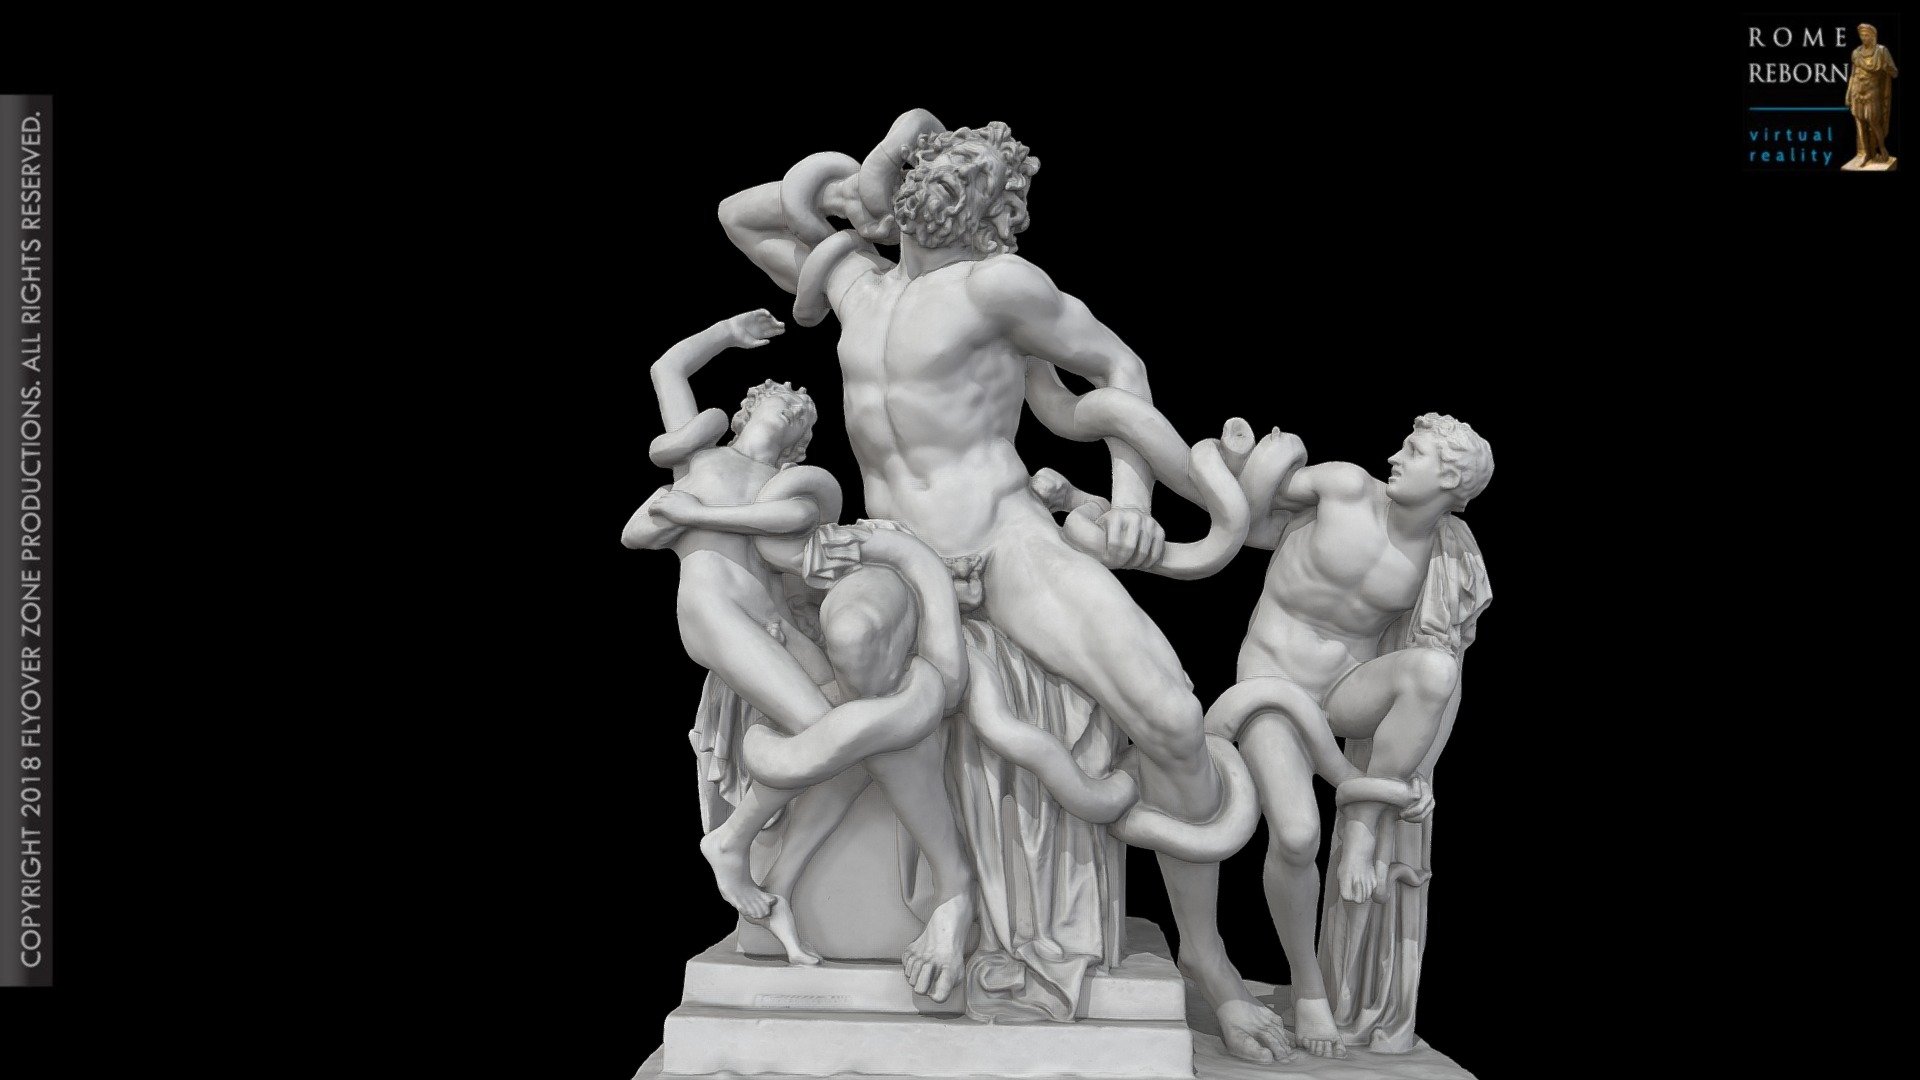 Name: Laocoon
Material: Cast (plaster of Paris)
Format: Statue Group
Museum: By permission of the Museo dell’Arte Classica, Sapienza University, Rome
Museum inventory number: 1025
Museum of original: Vatican Museums ( 1059 [statue group], 1064 [&ldquo;Pollak